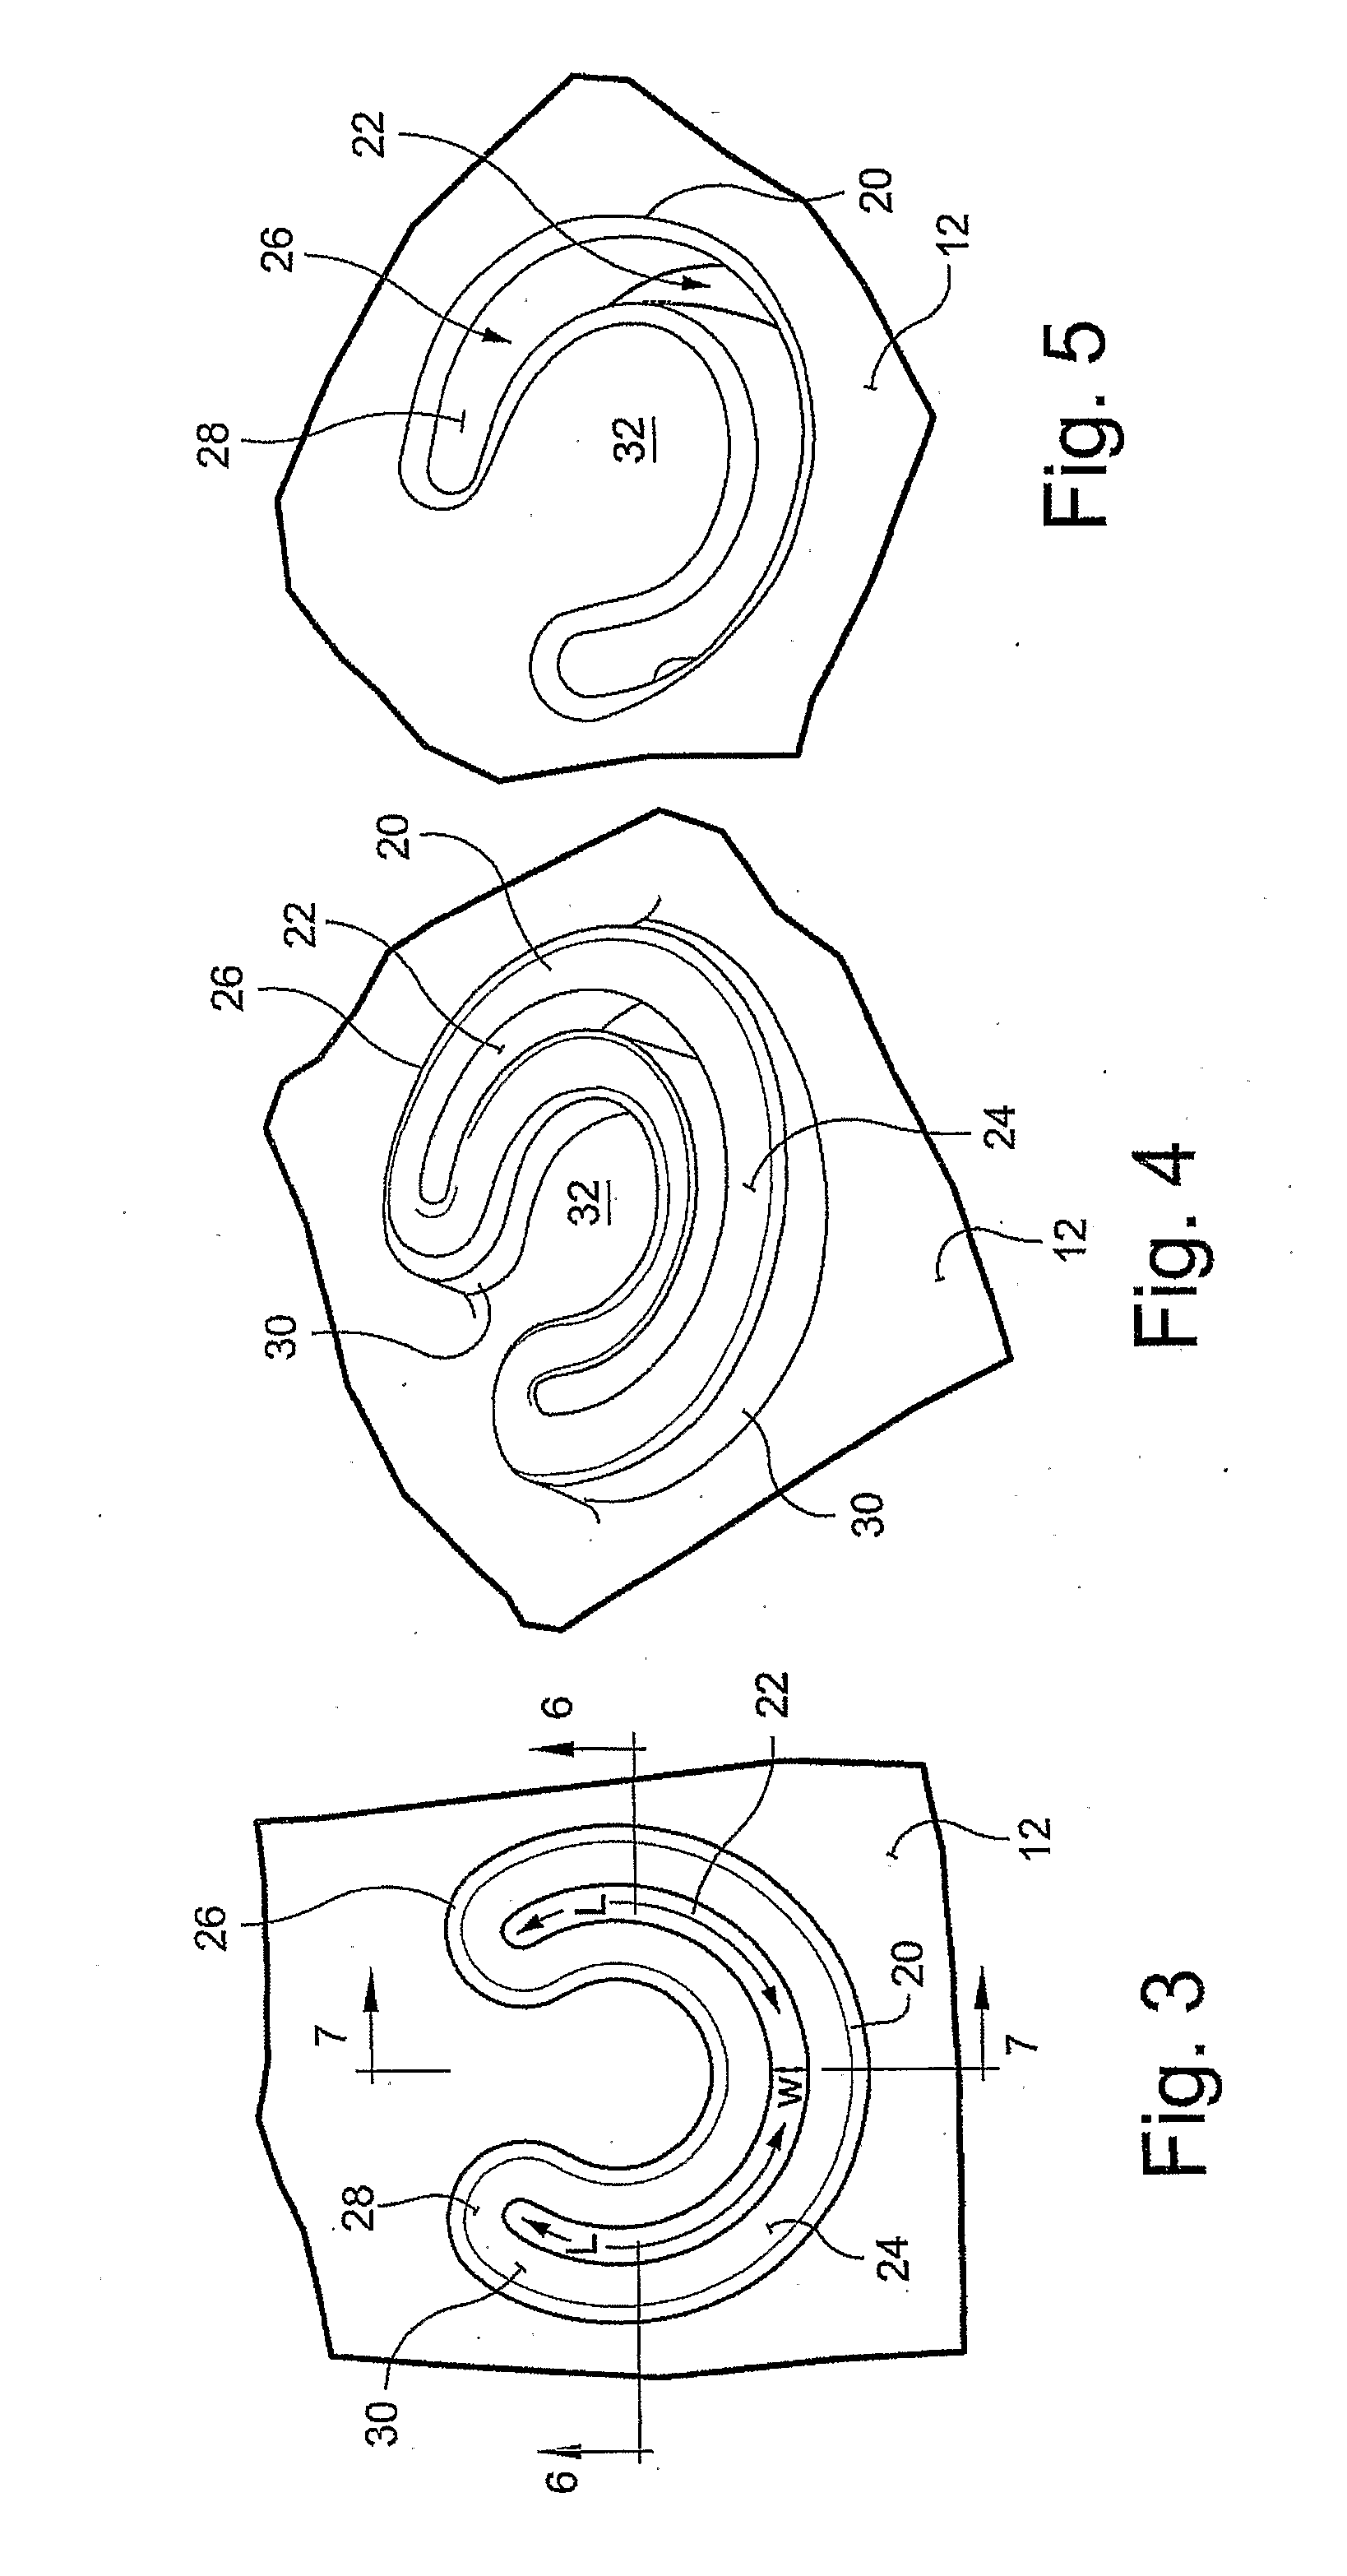 Respiratory mask having gas washout vent and method for making the mask